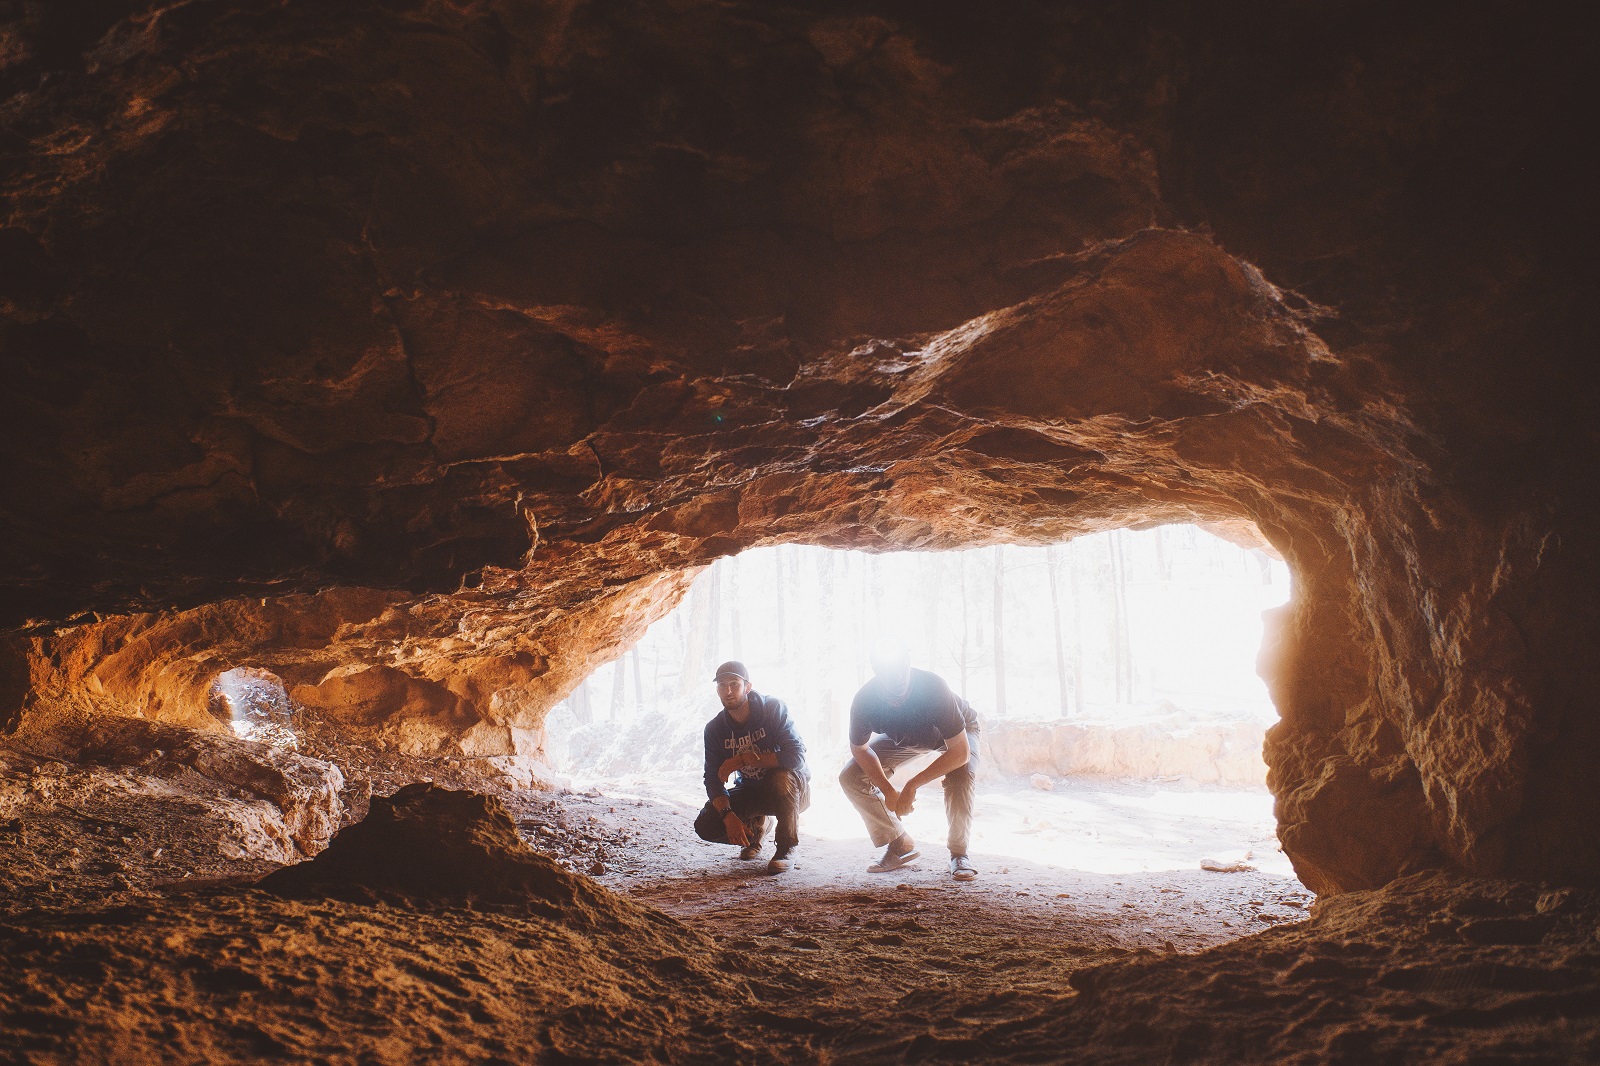 Two men crouching to look in the Salt Caves at the Pilliga in Timmallallie National Park. Photo credit: Harrison Candlin/DPIE